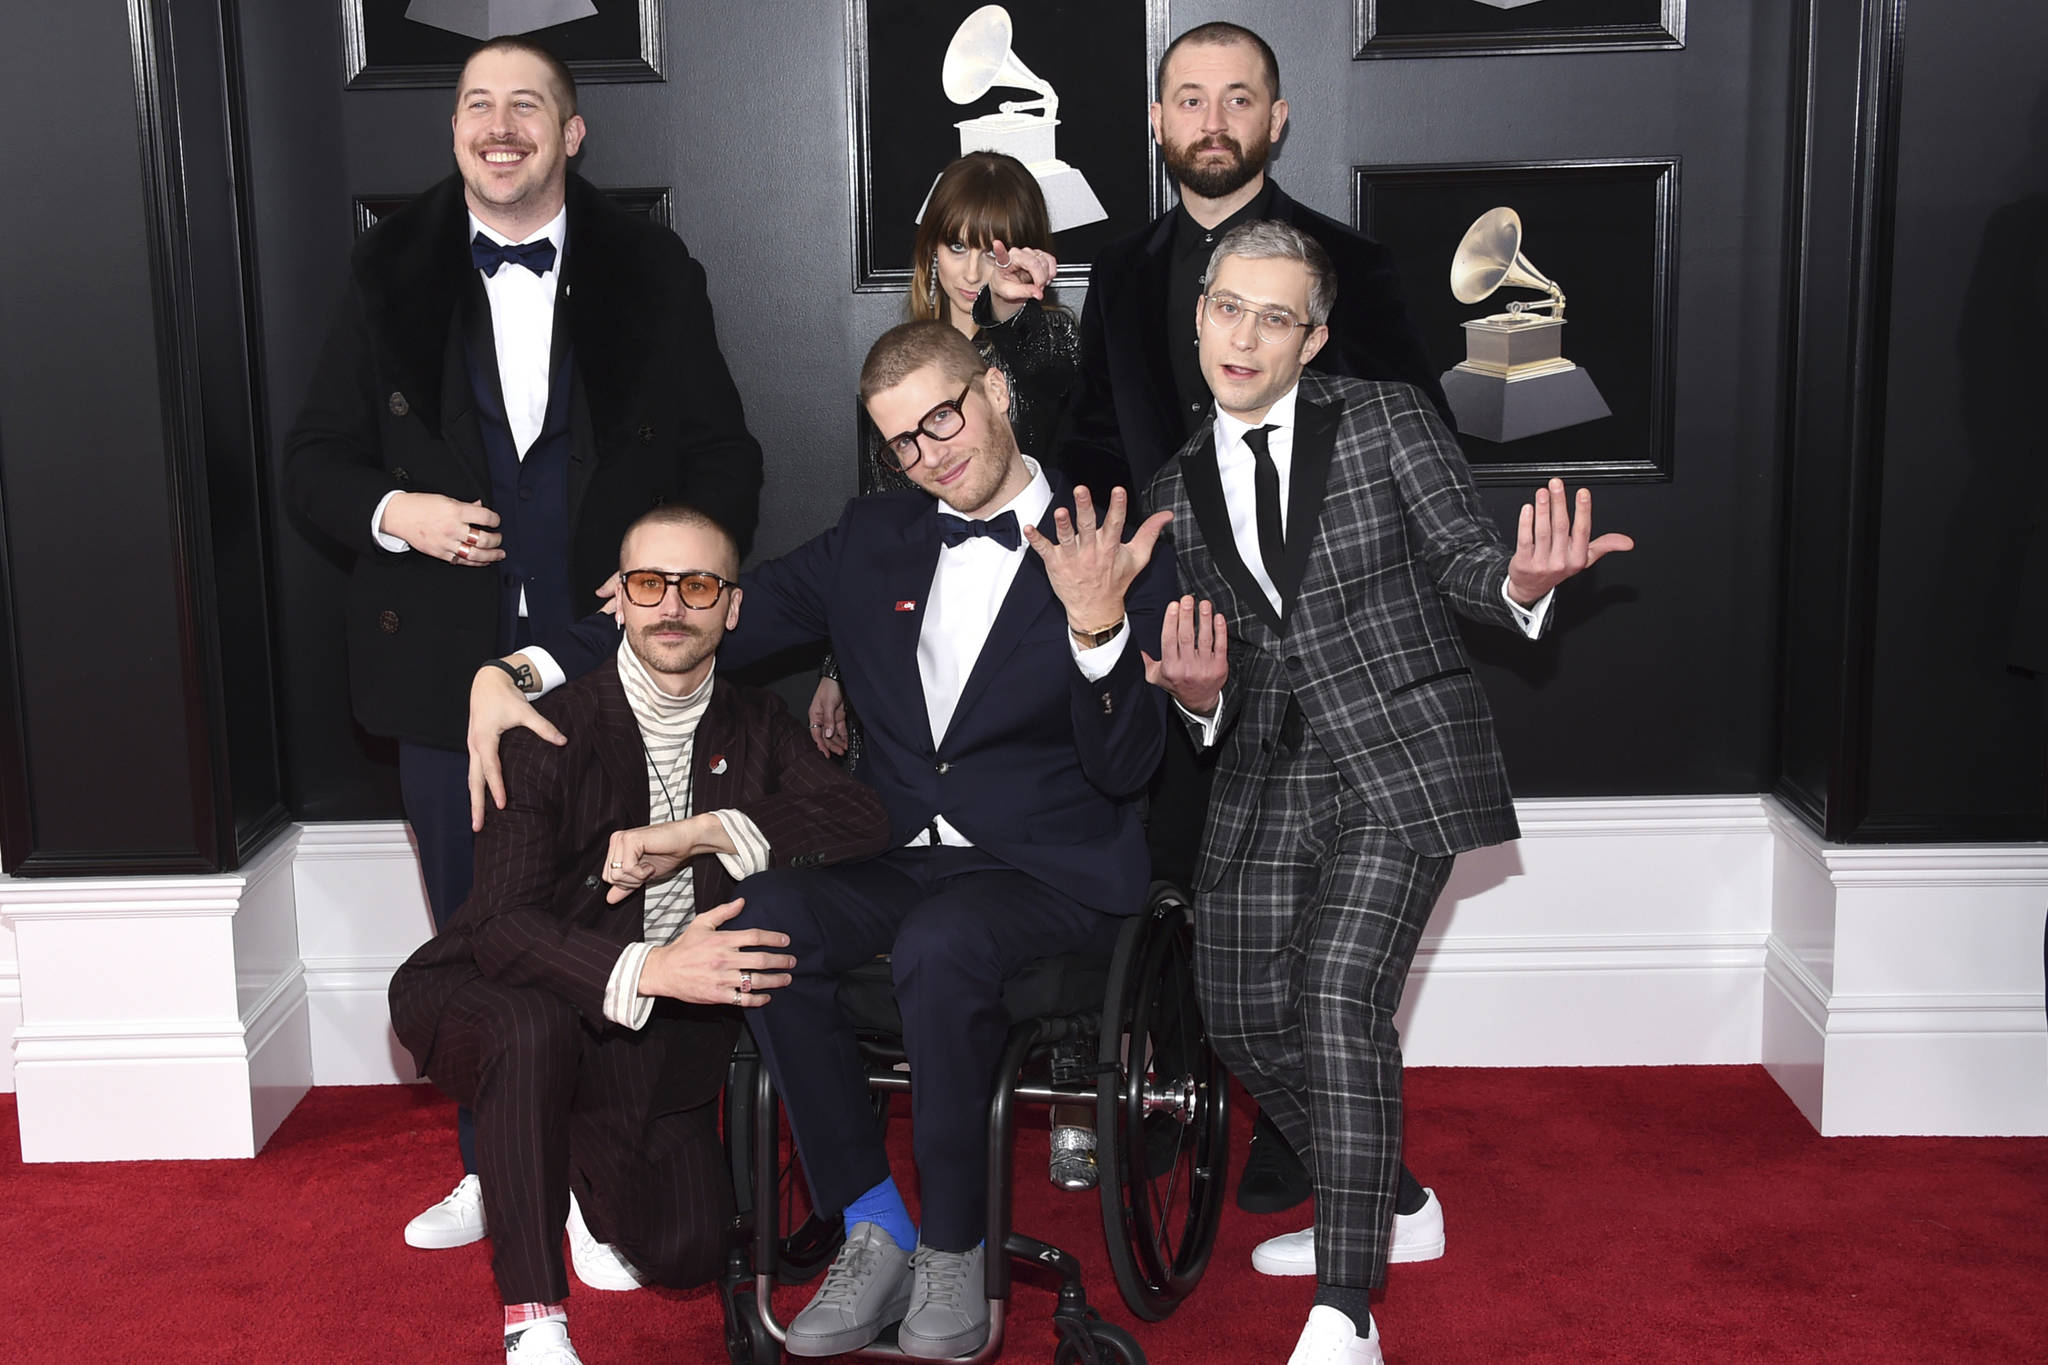 In this Jan. 28, 2018 file photo, from left, Zachary Scott Carothers, John Gourley, Eric Howk, Zoe Manville, Jason Wade Sechrist and Kyle O’Quin of Portugal. The Man arrive at the 60th annual Grammy Awards at Madison Square Garden in New York. The state of Alaska’s new hold music is on hold. A project to replace the sleepy hold music for state office lines with music by Alaska artists drew widespread attention when it was announced in November, touting Portugal. The Man and four other artists with Alaska ties. A spokesman for Gov. Mike Dunleavy says it was muted shortly thereafter after concerns with some of the music were raised by the public.(Photo by Evan Agostini/Invision/AP, File)